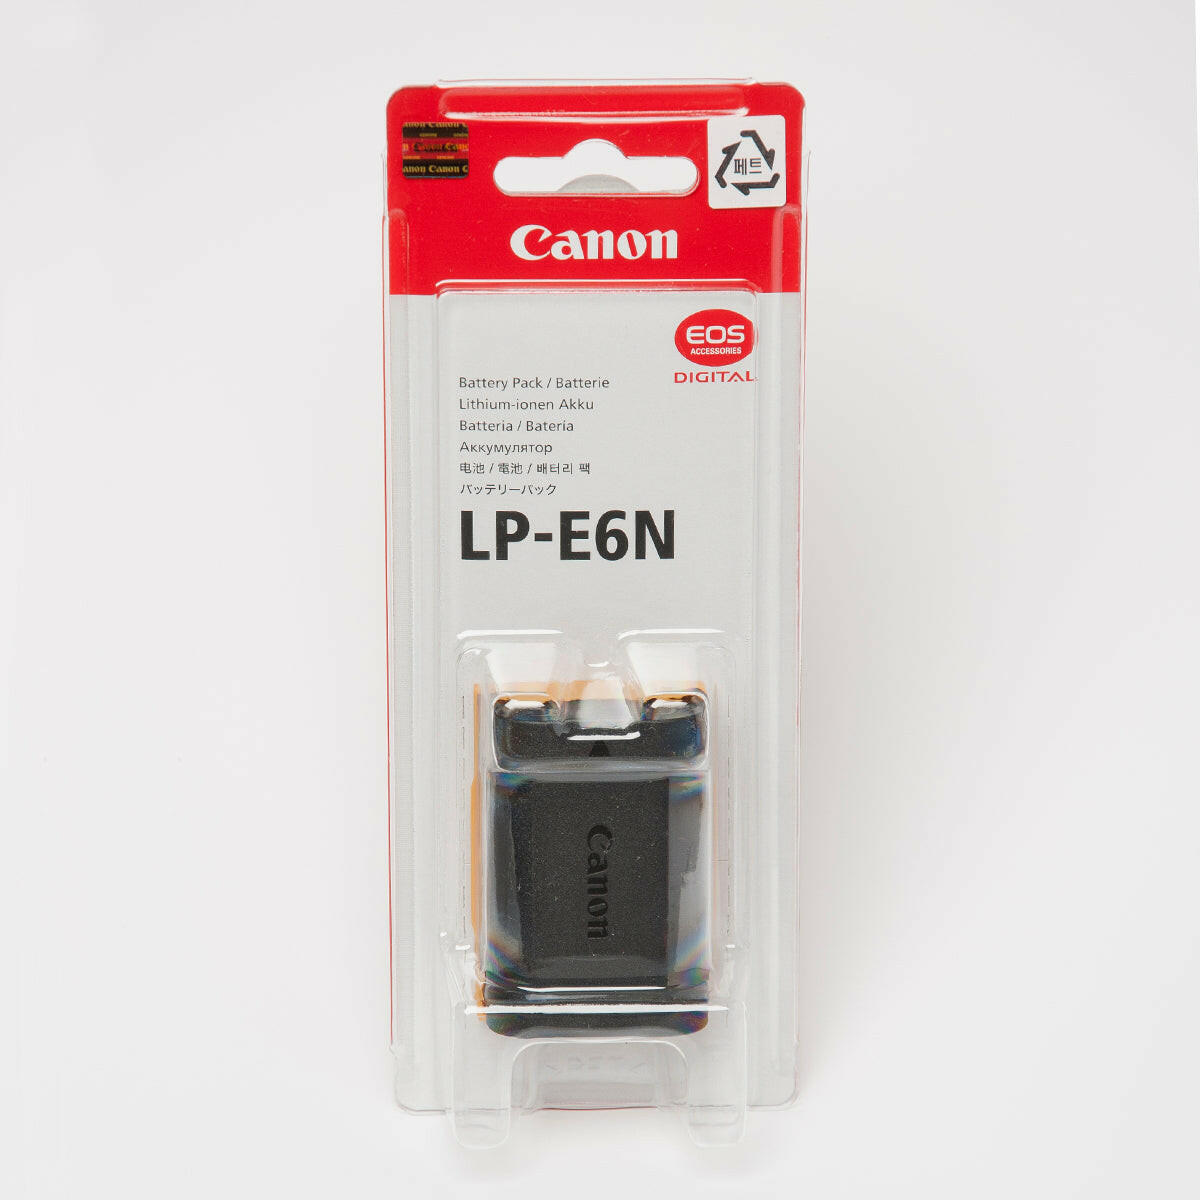 Accessories - Battery Pack LP-E4N - Canon South & Southeast Asia